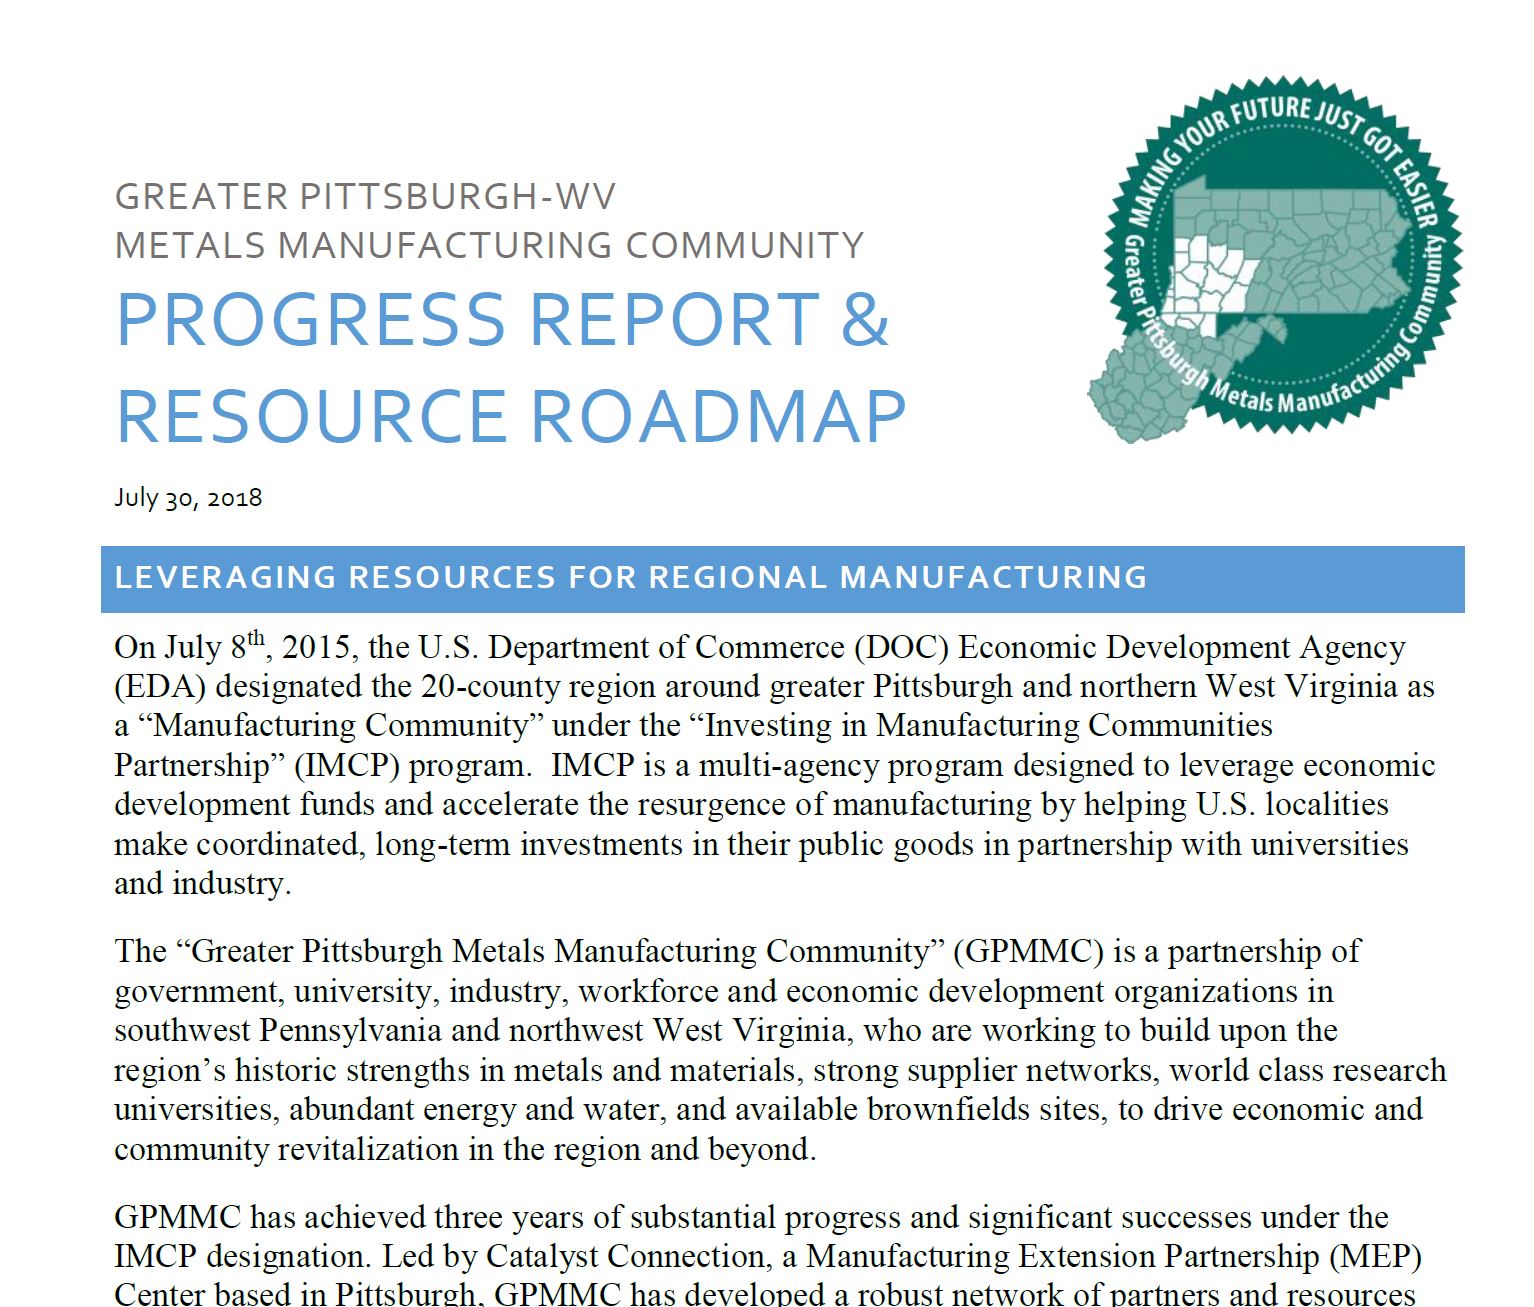 Greater Pittsburgh-WV Metals Manufacturing Community Progress Report and Resource Roadmap